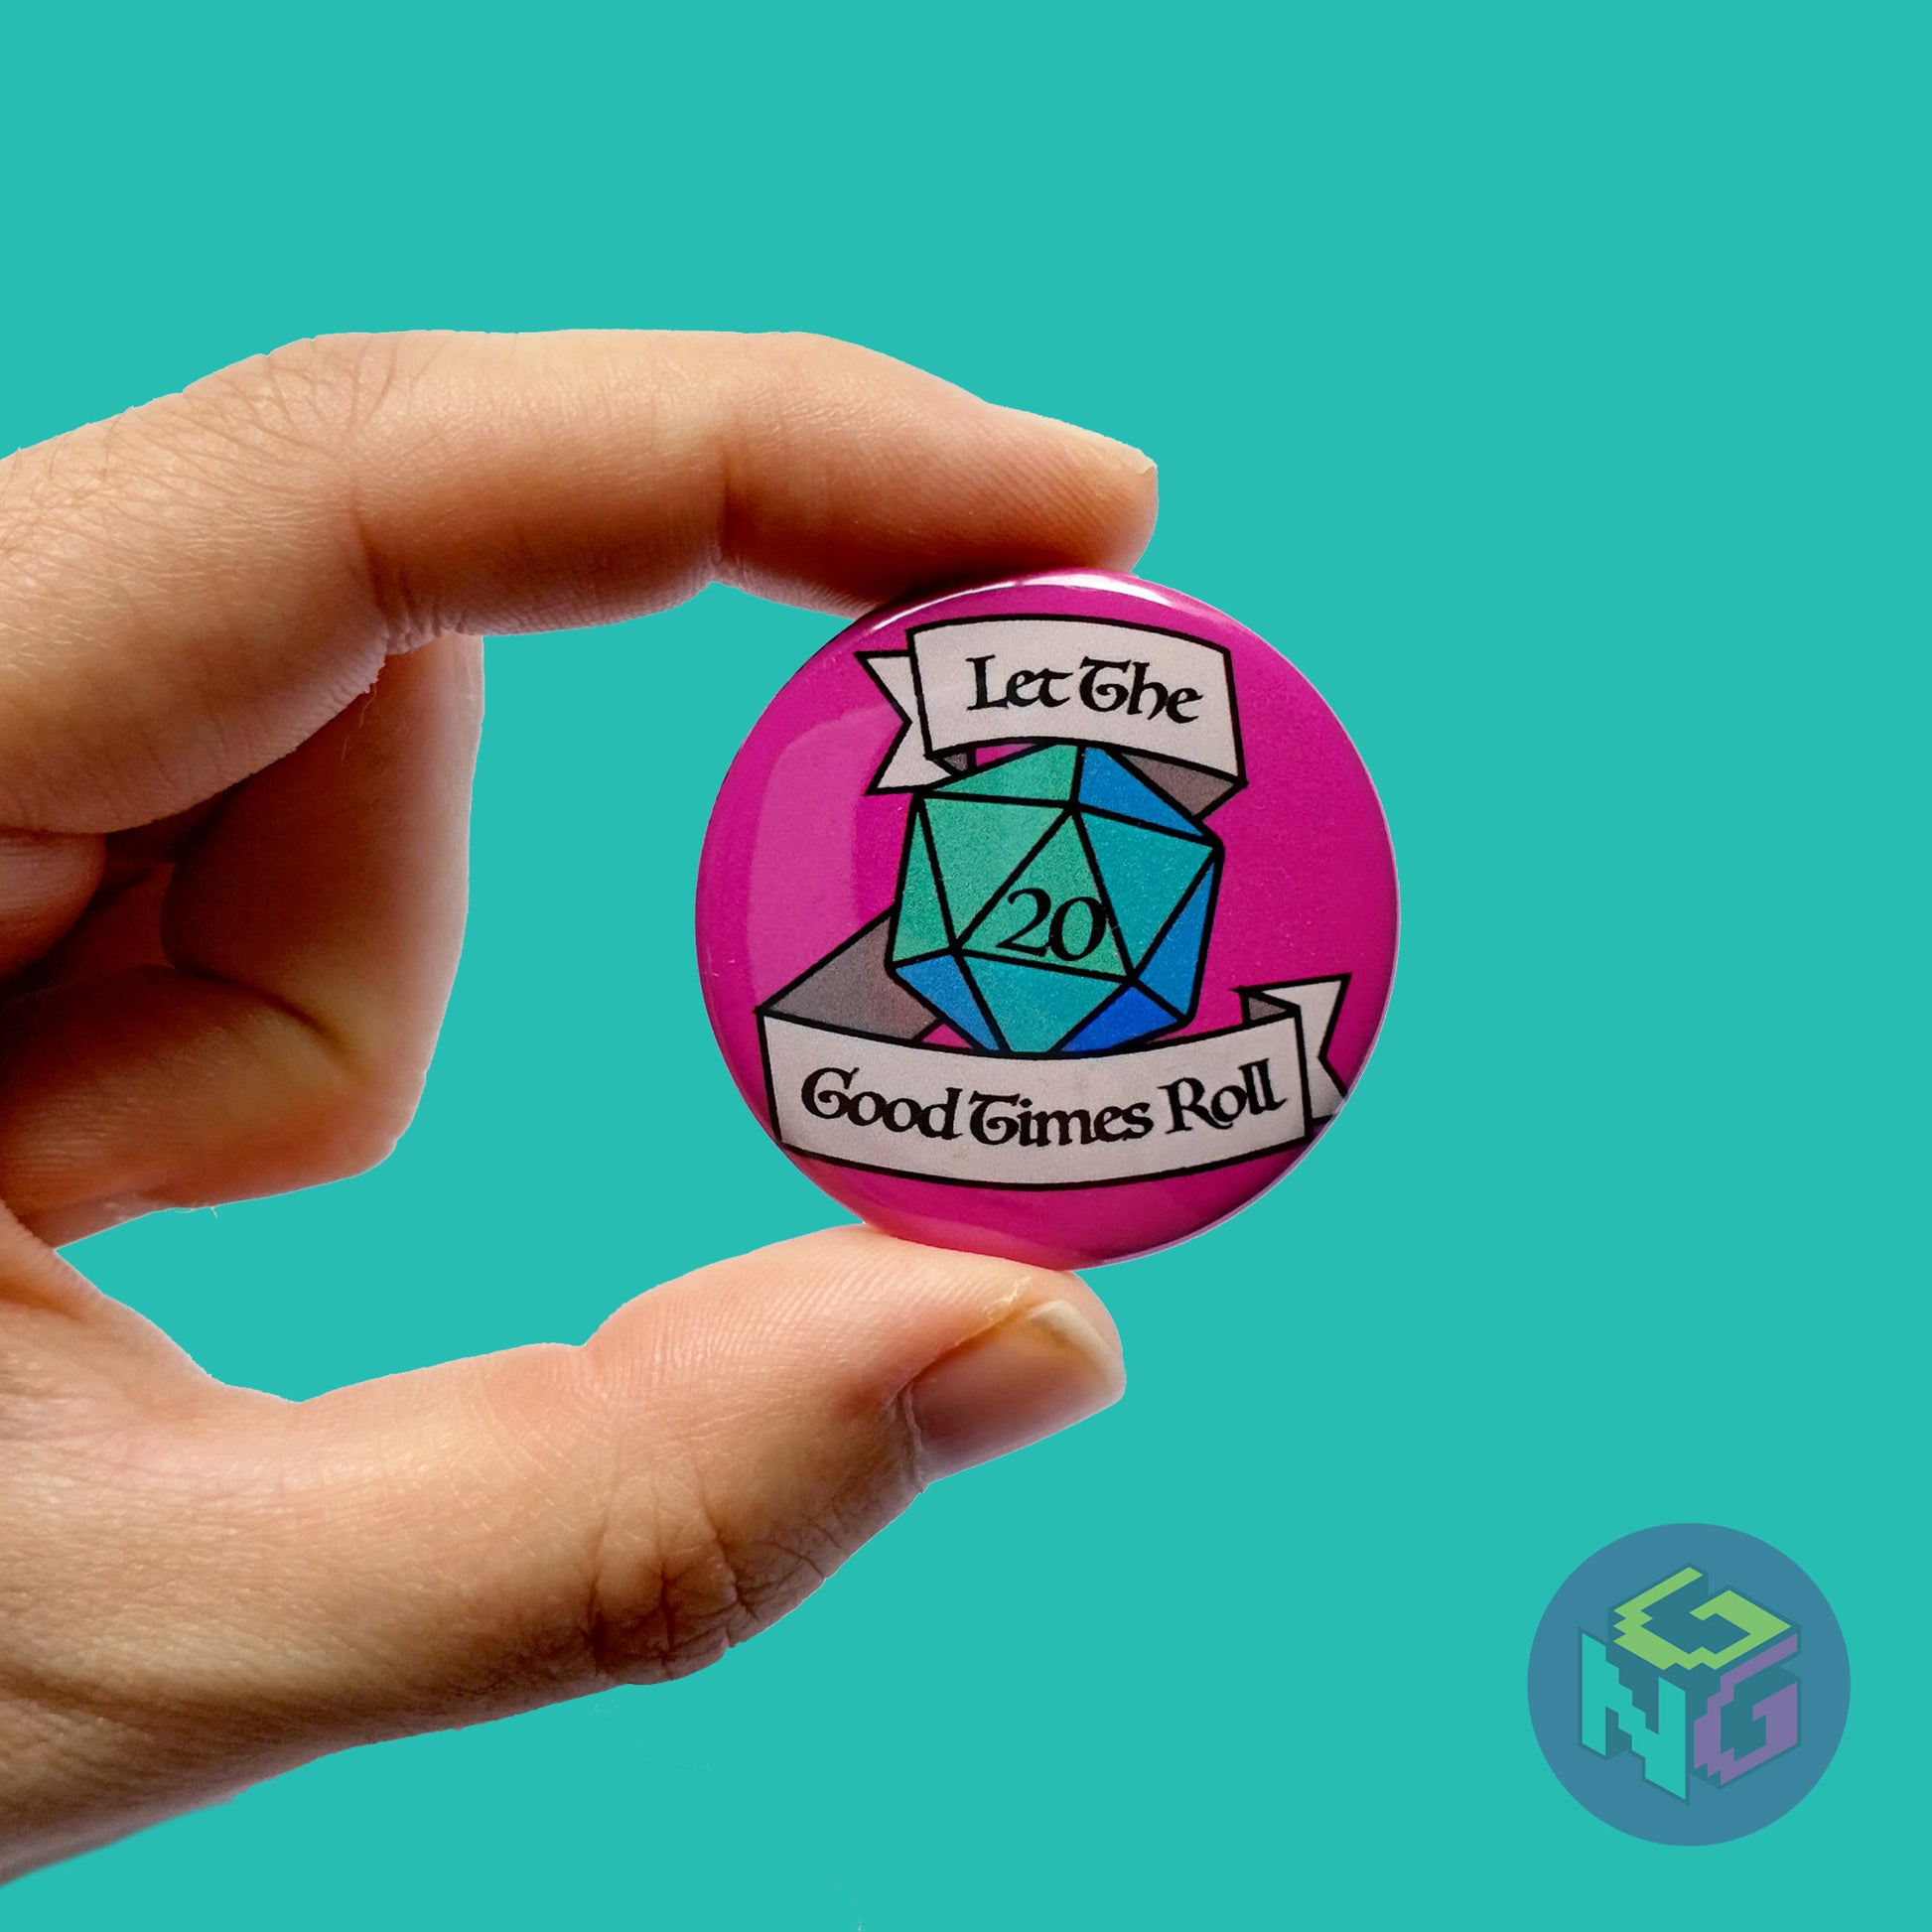 let the good times roll d20 button held in hand in front of mint green background